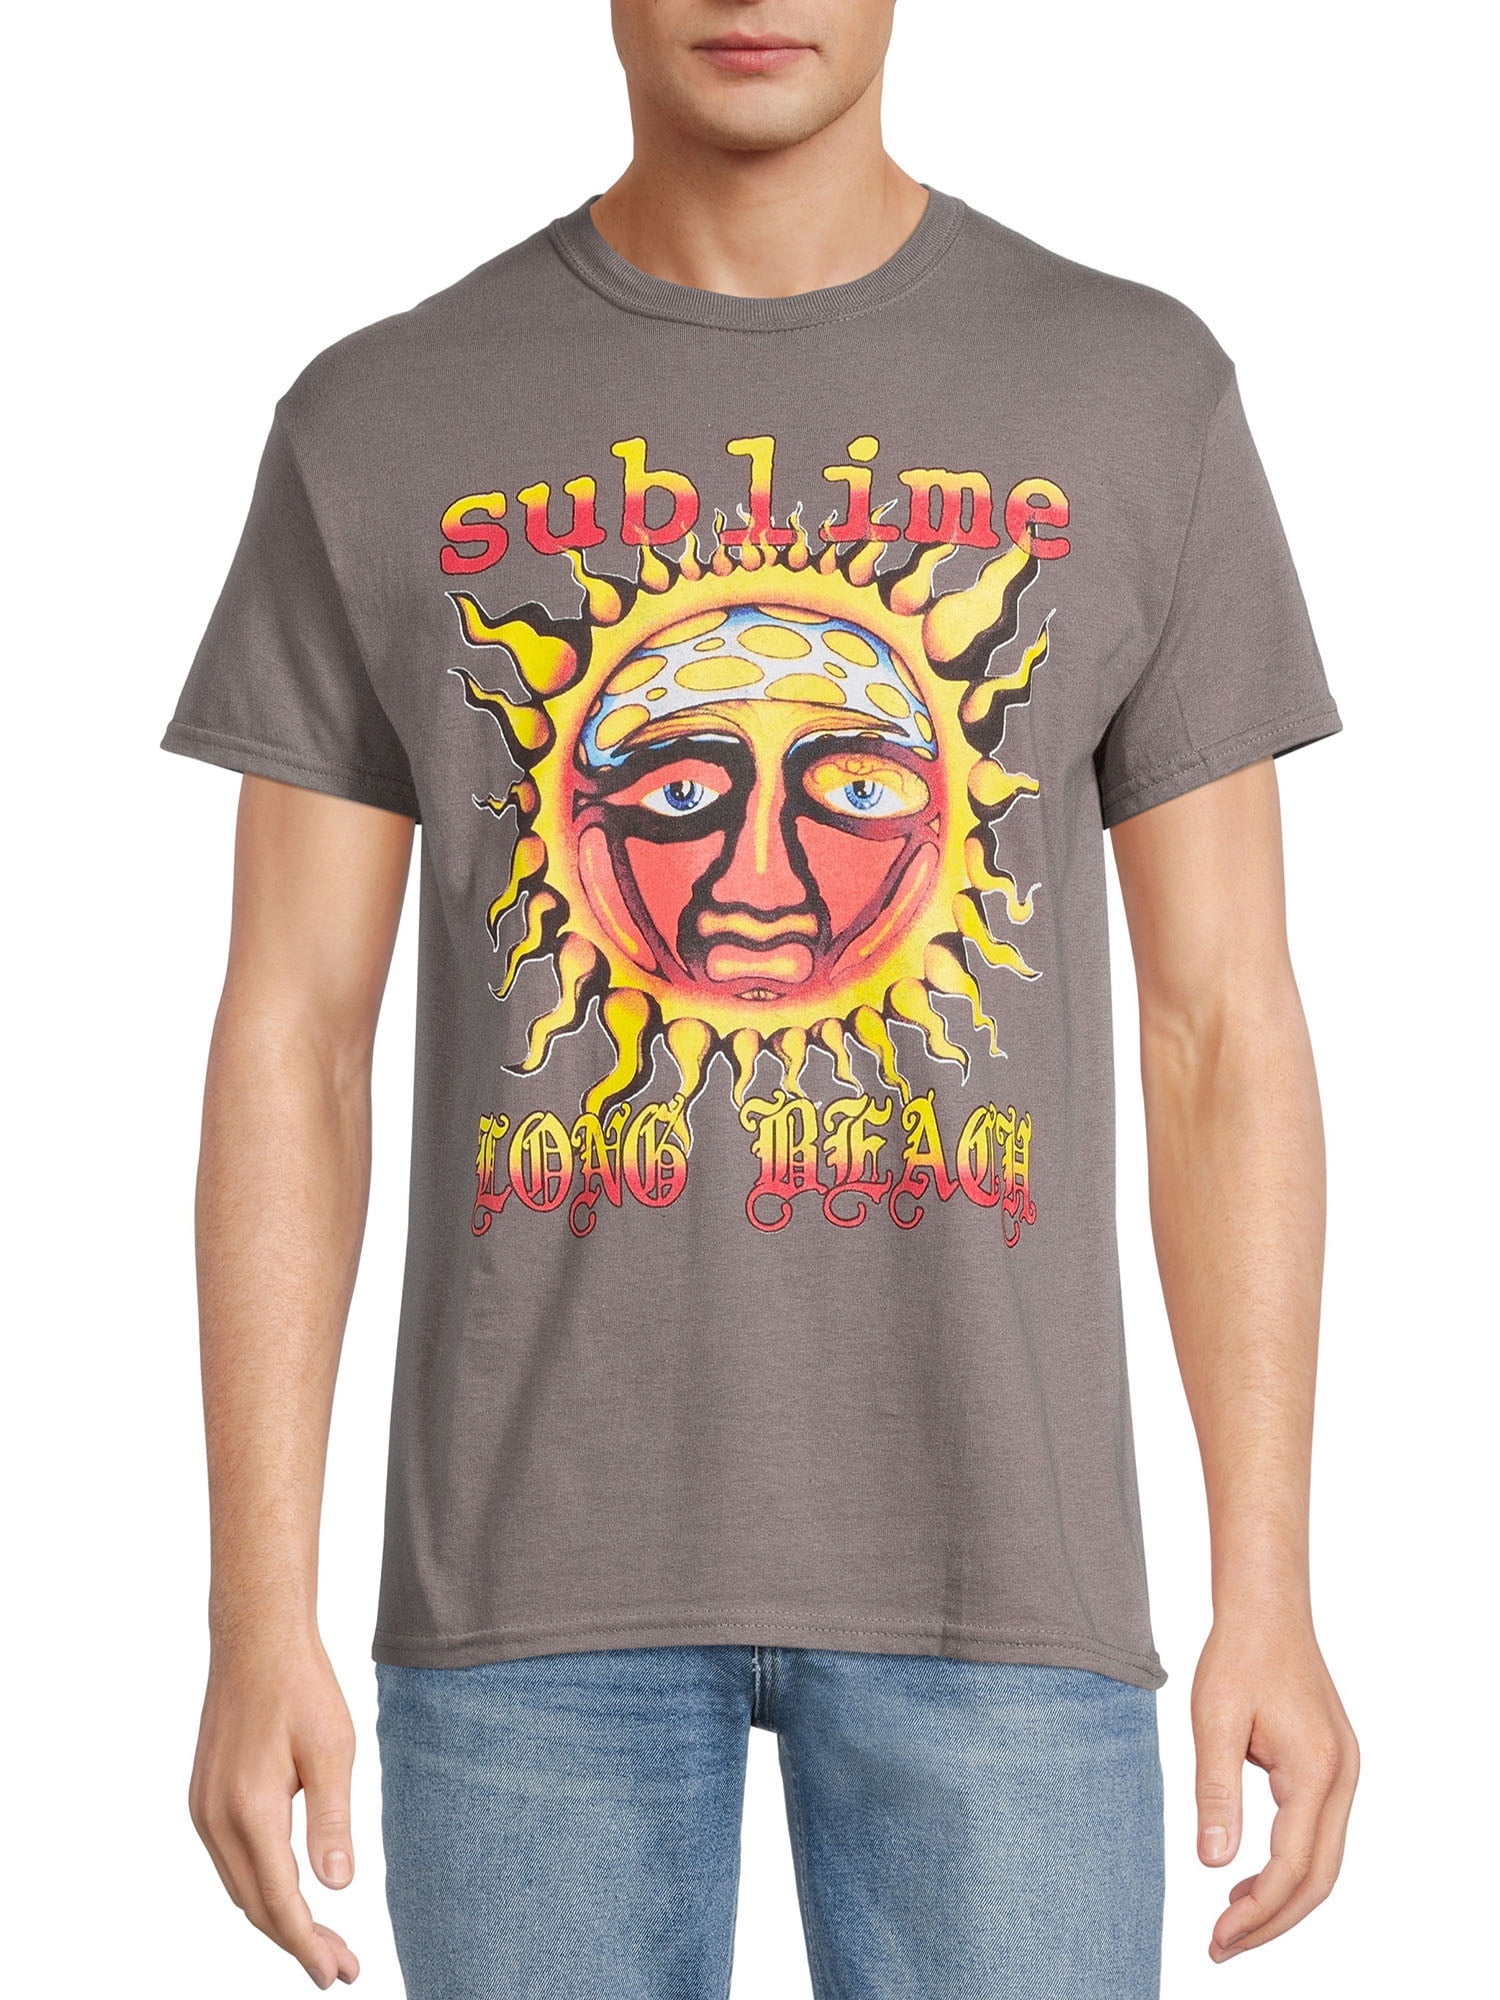 Sublime Men's Short Sleeve Graphic Tee